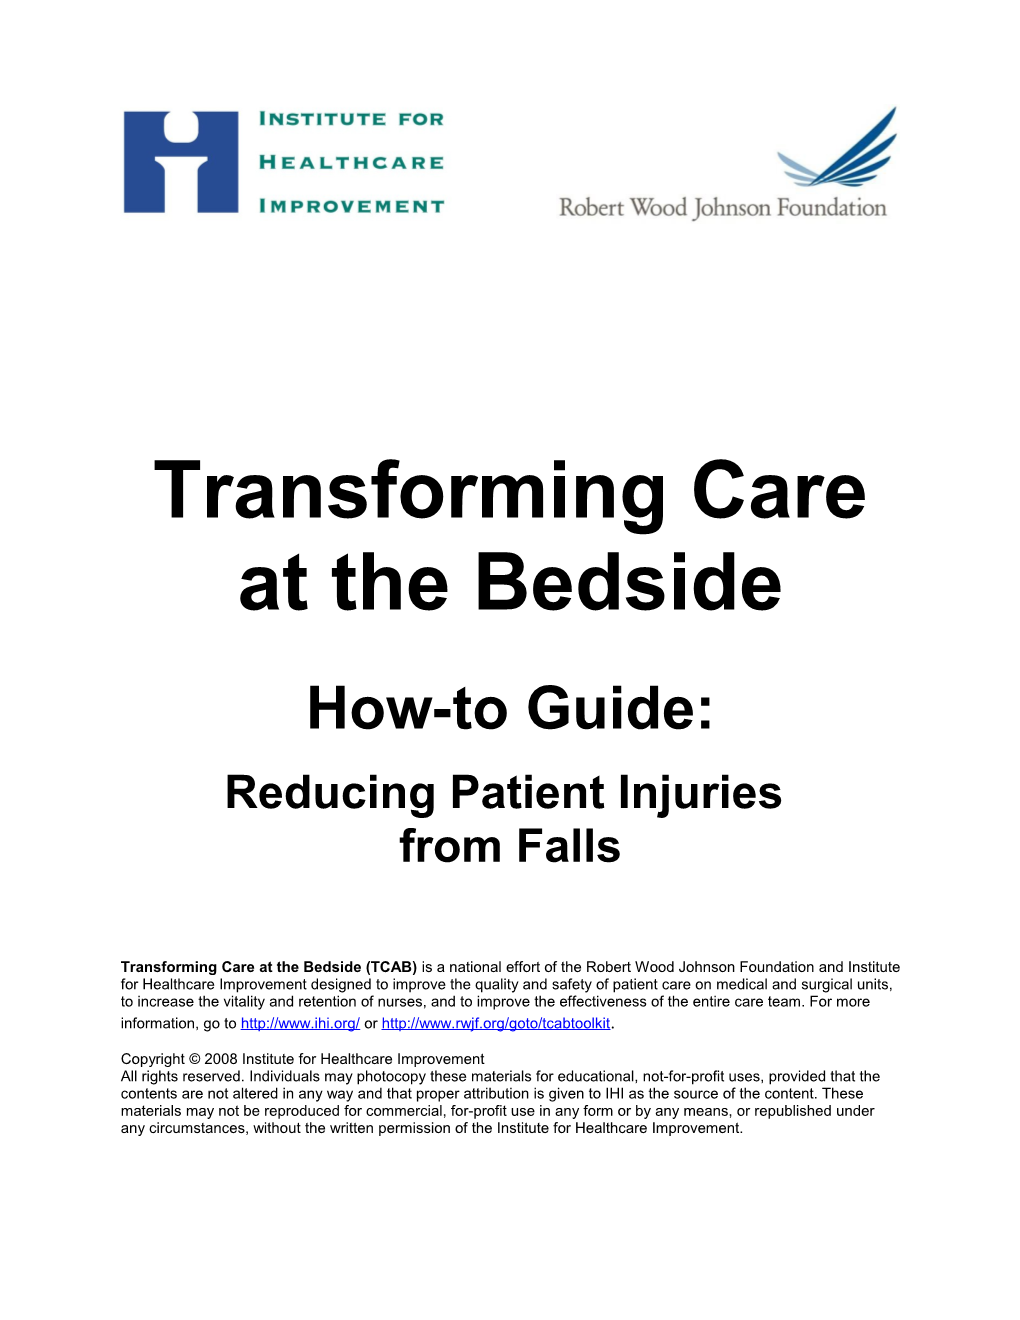 TCAB How-To Guide: Reducing Patient Injuries from Falls